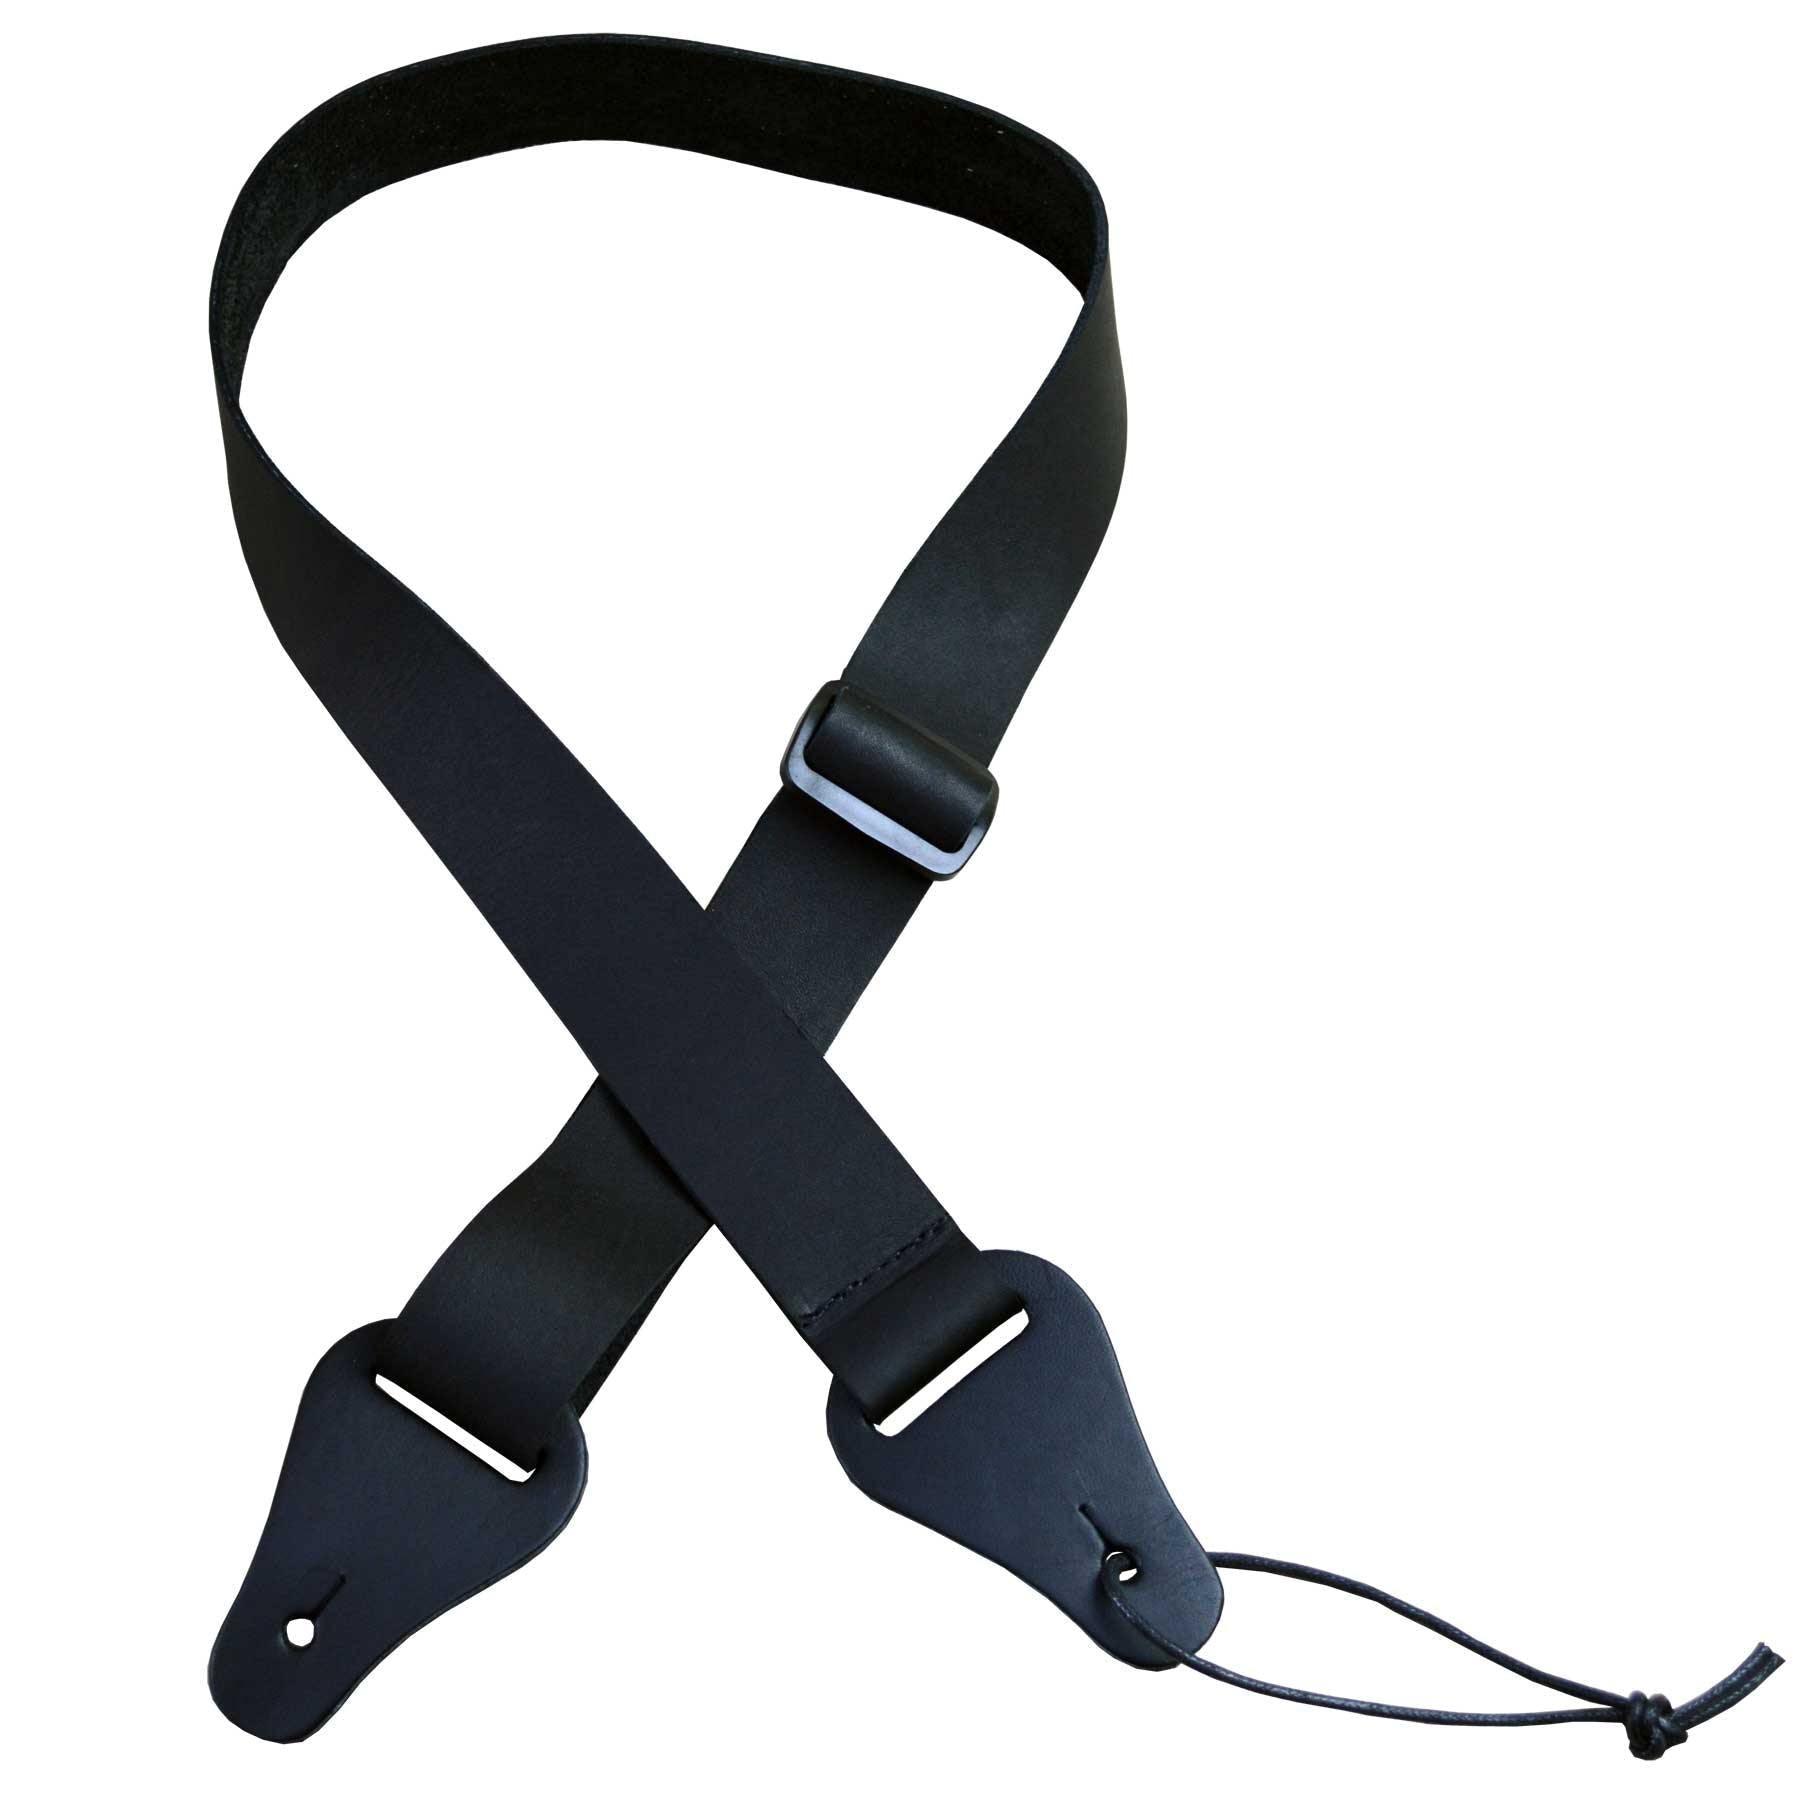 Colonial 40mm Black Leather Uke Strap - SASUKE-BK - Straps by Colonial Leather at Muso's Stuff